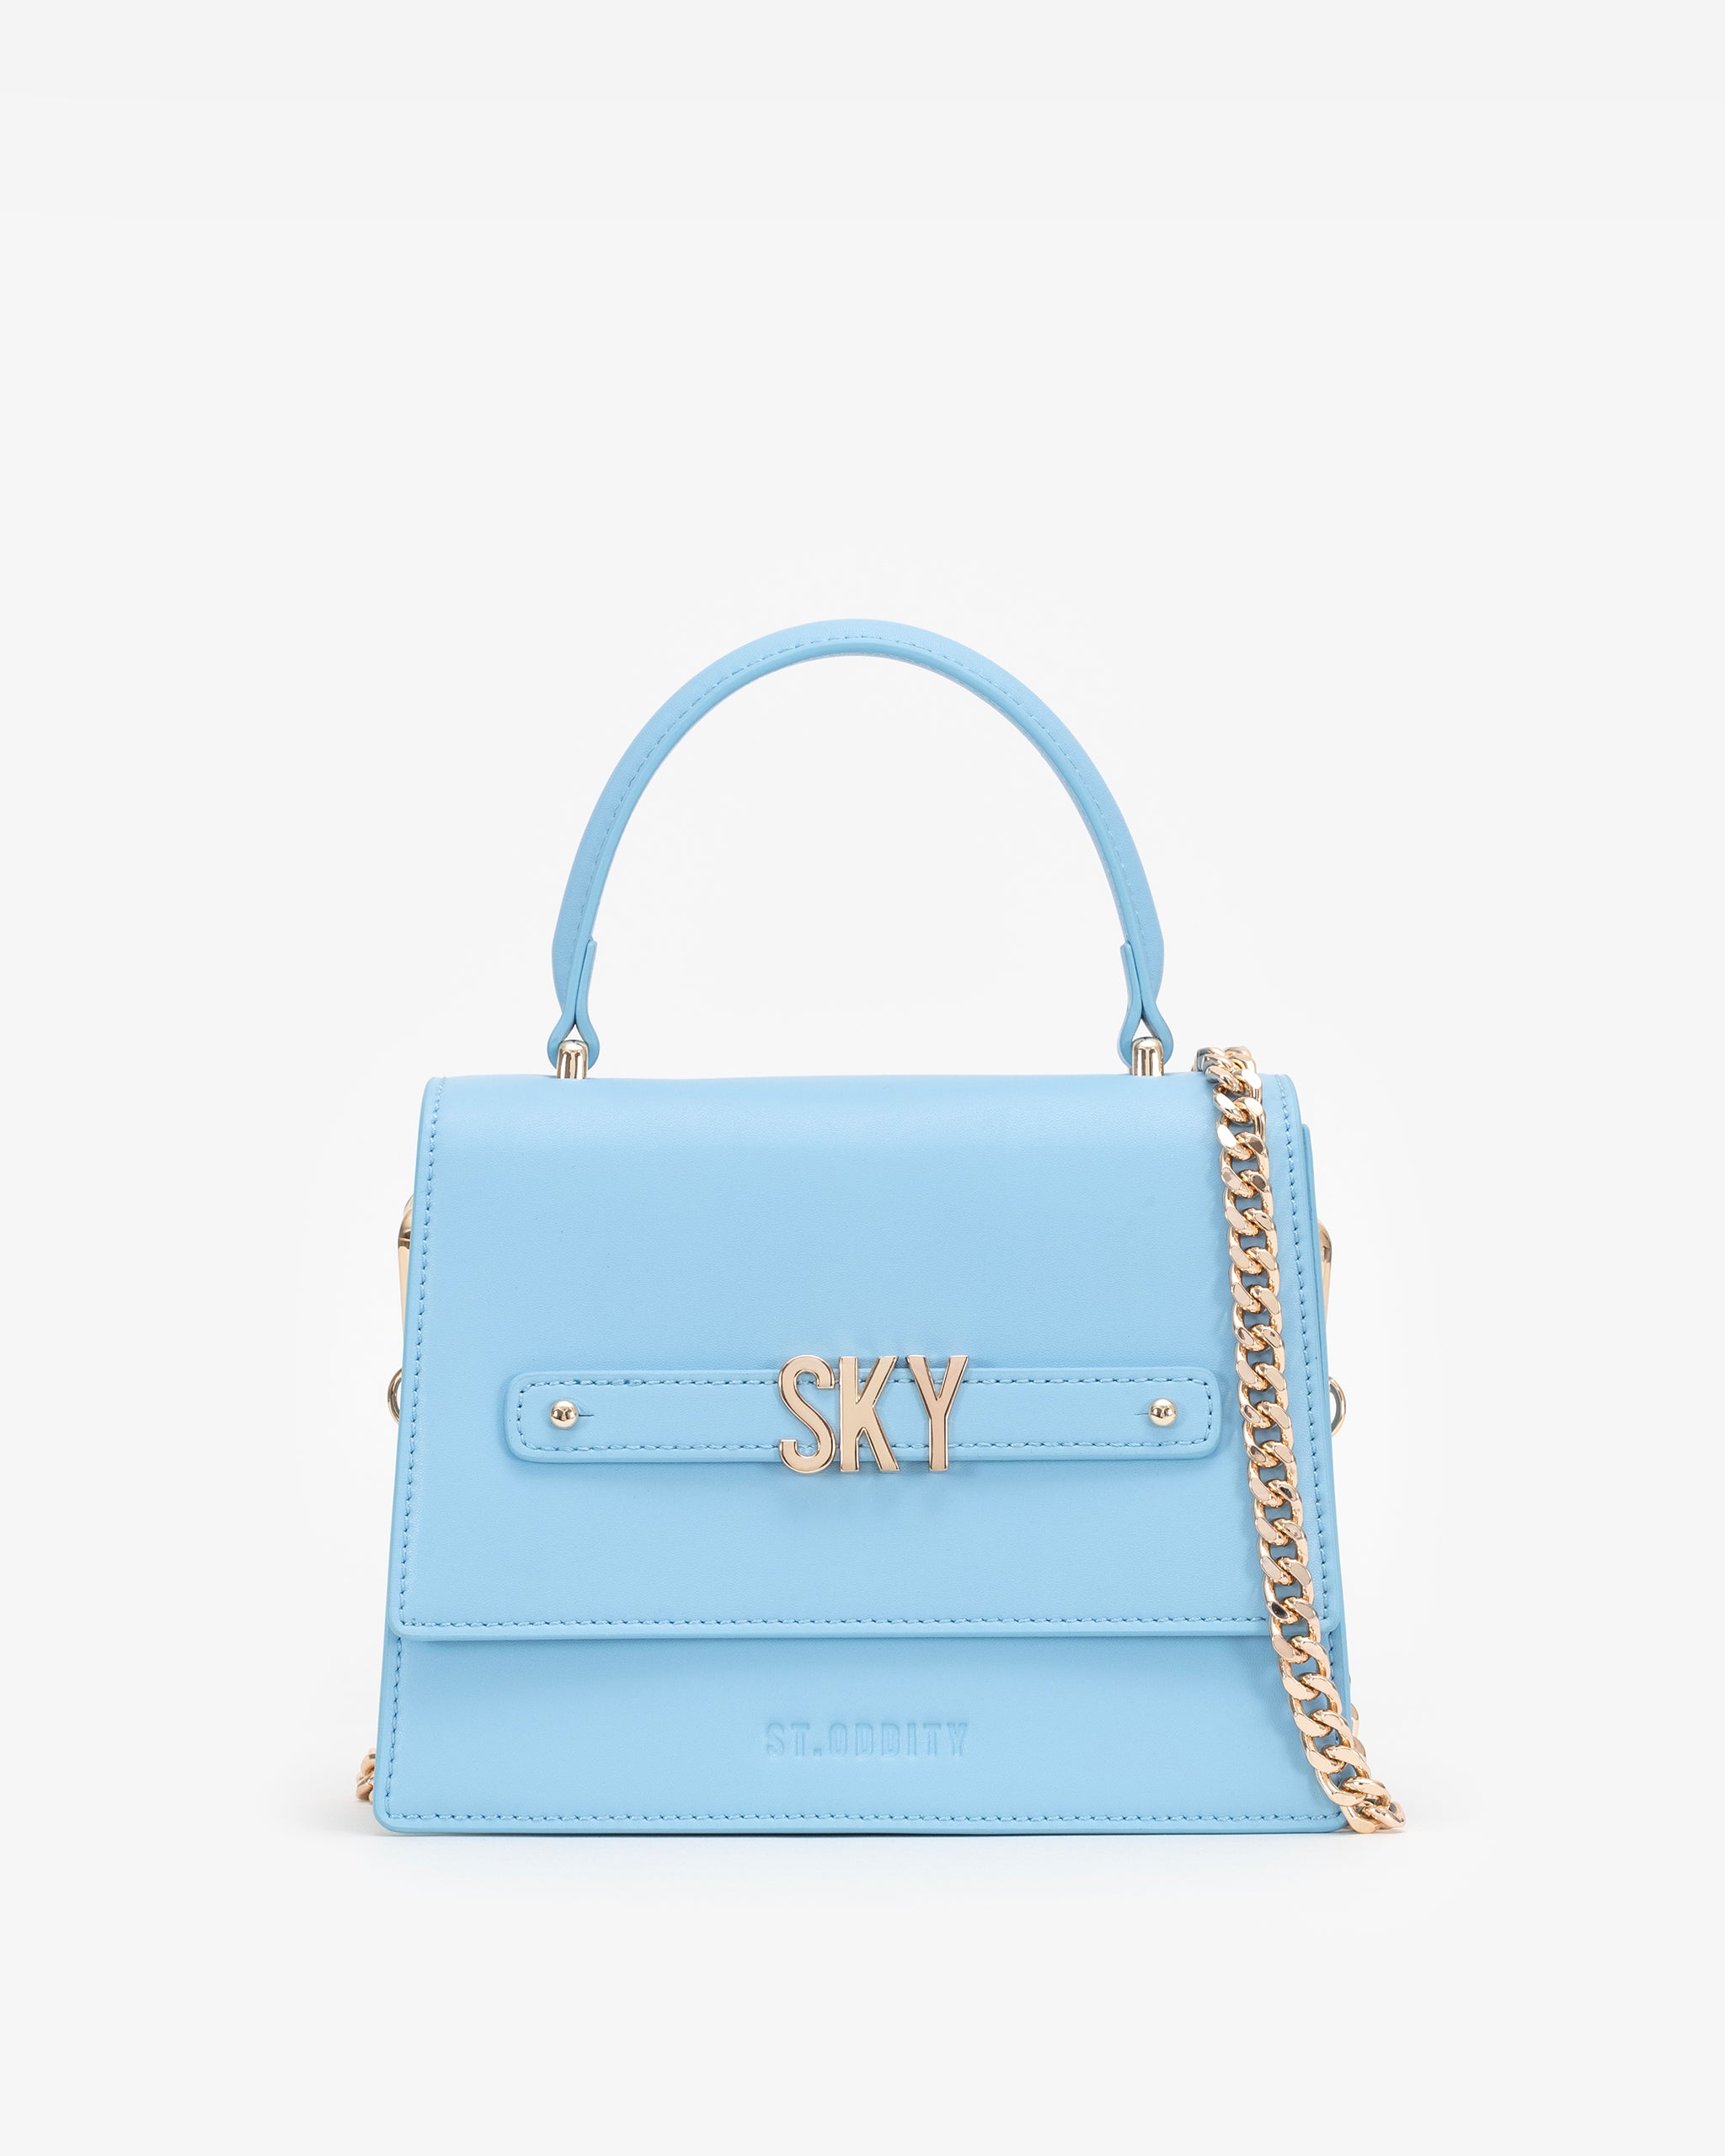 Evening Bag in Sky Blue with Personalised Hardware